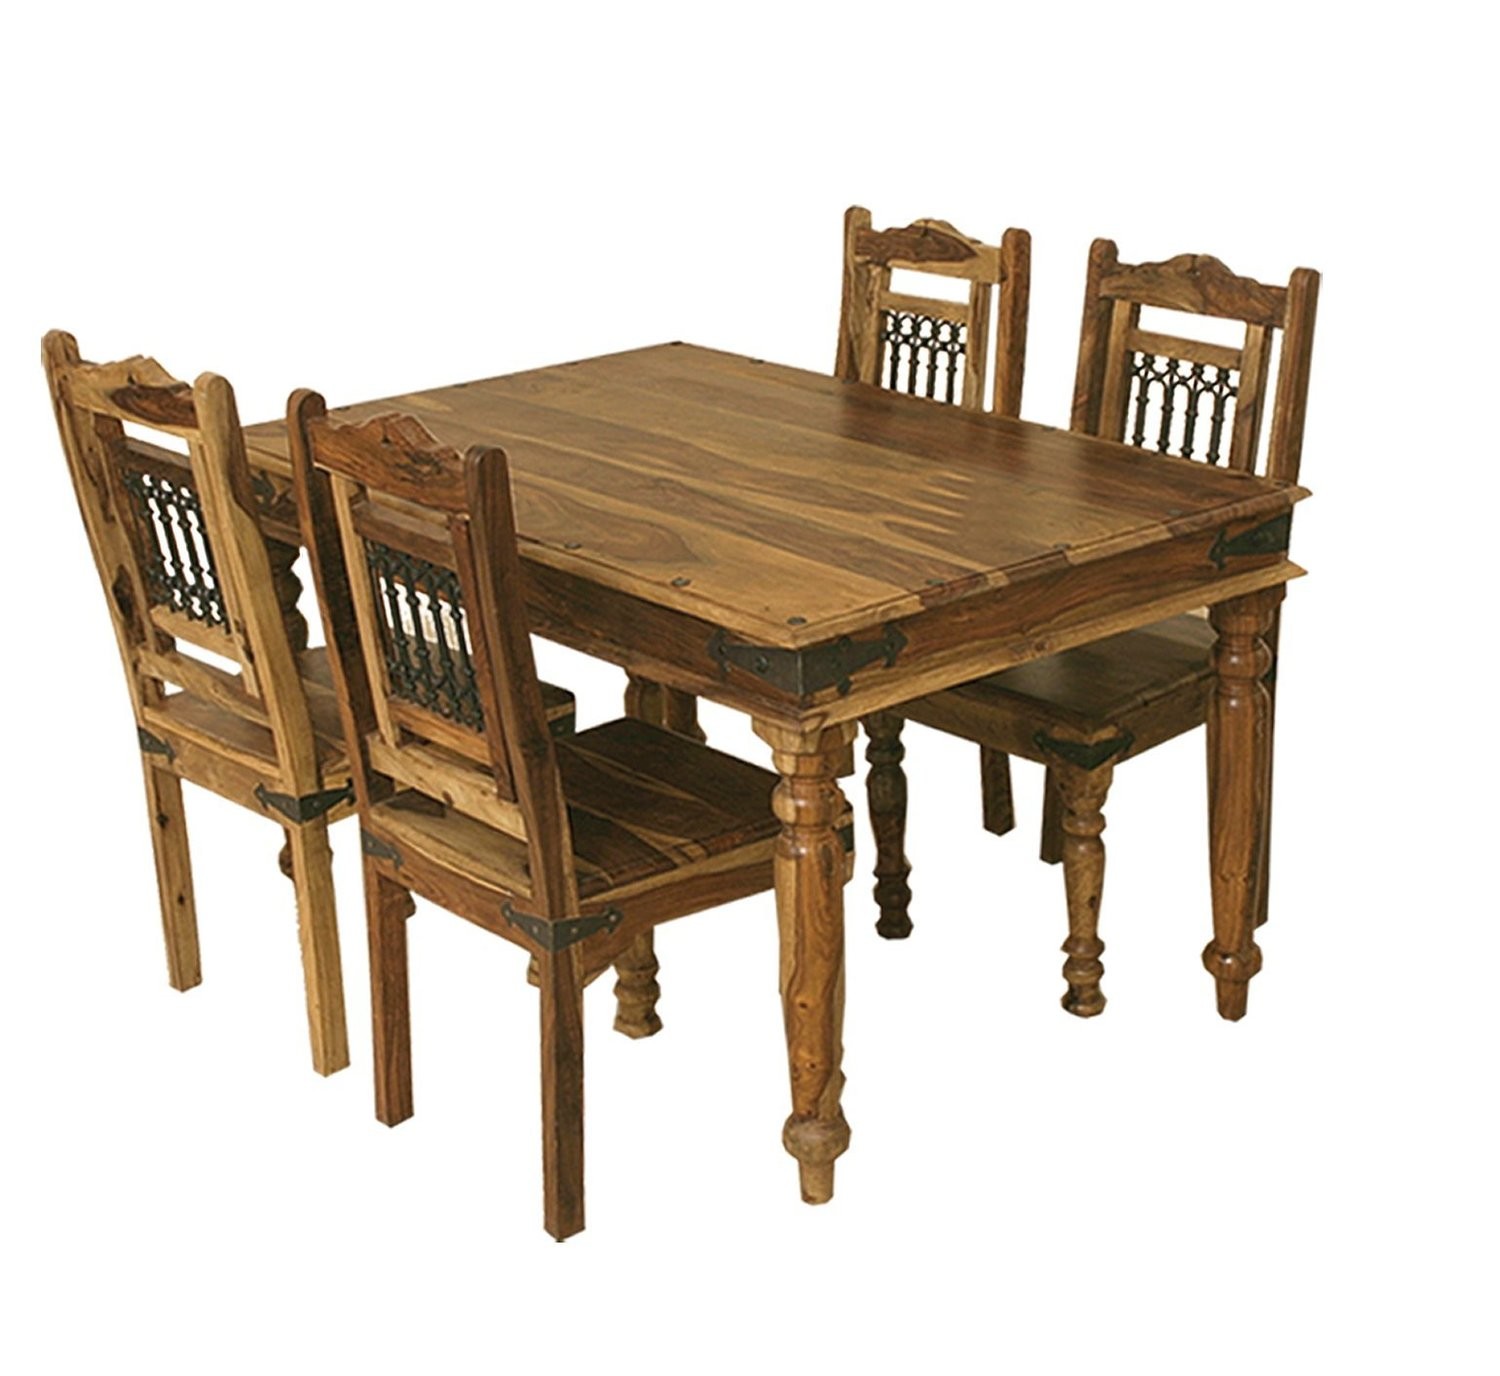 Jali 1.35 Dining Table with 4 Chairs